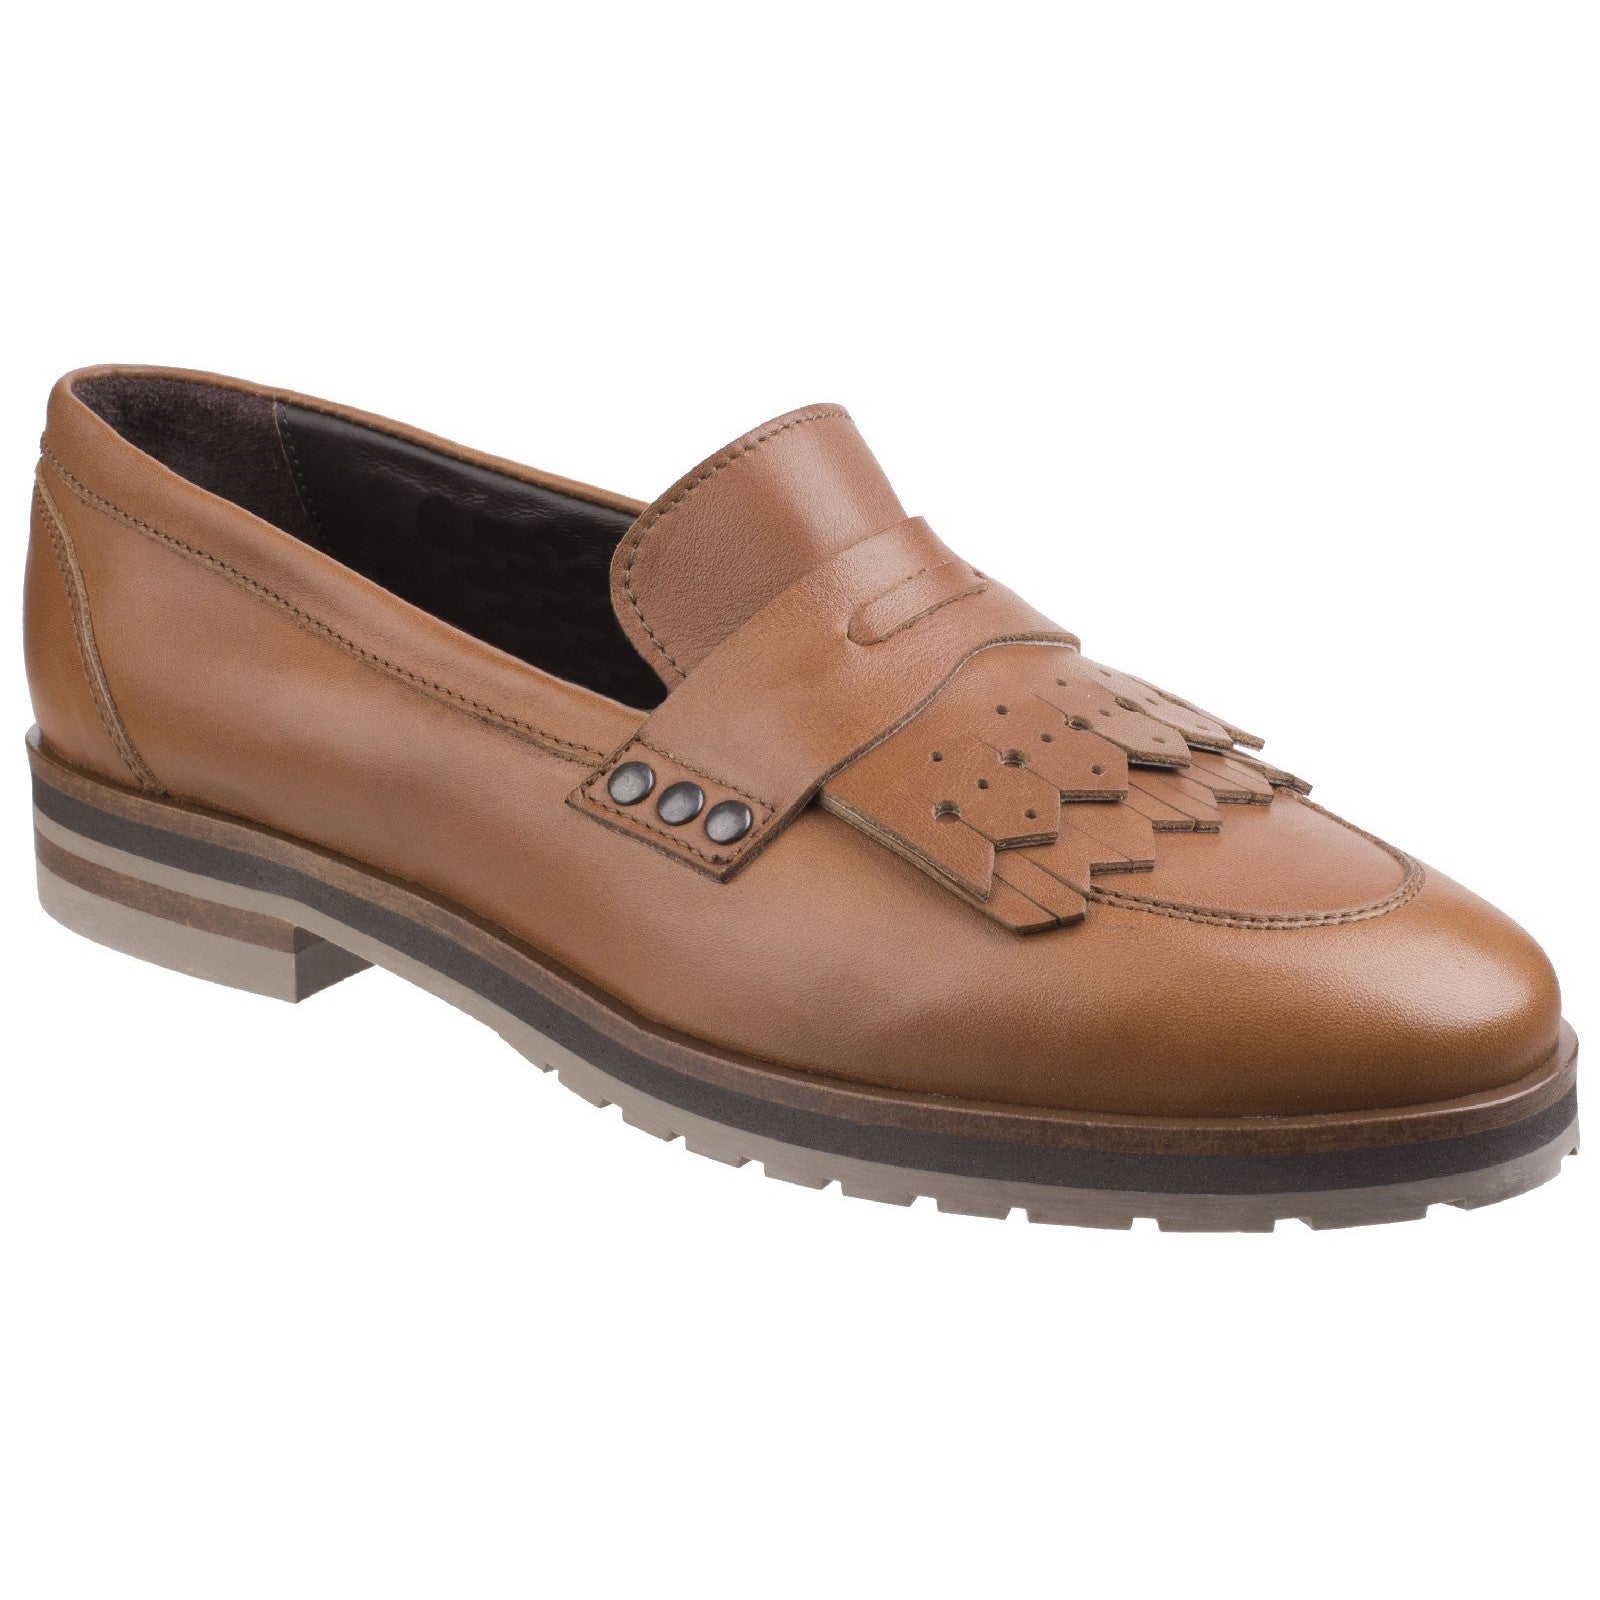 Riva Olympia Ladies Loafer Flats